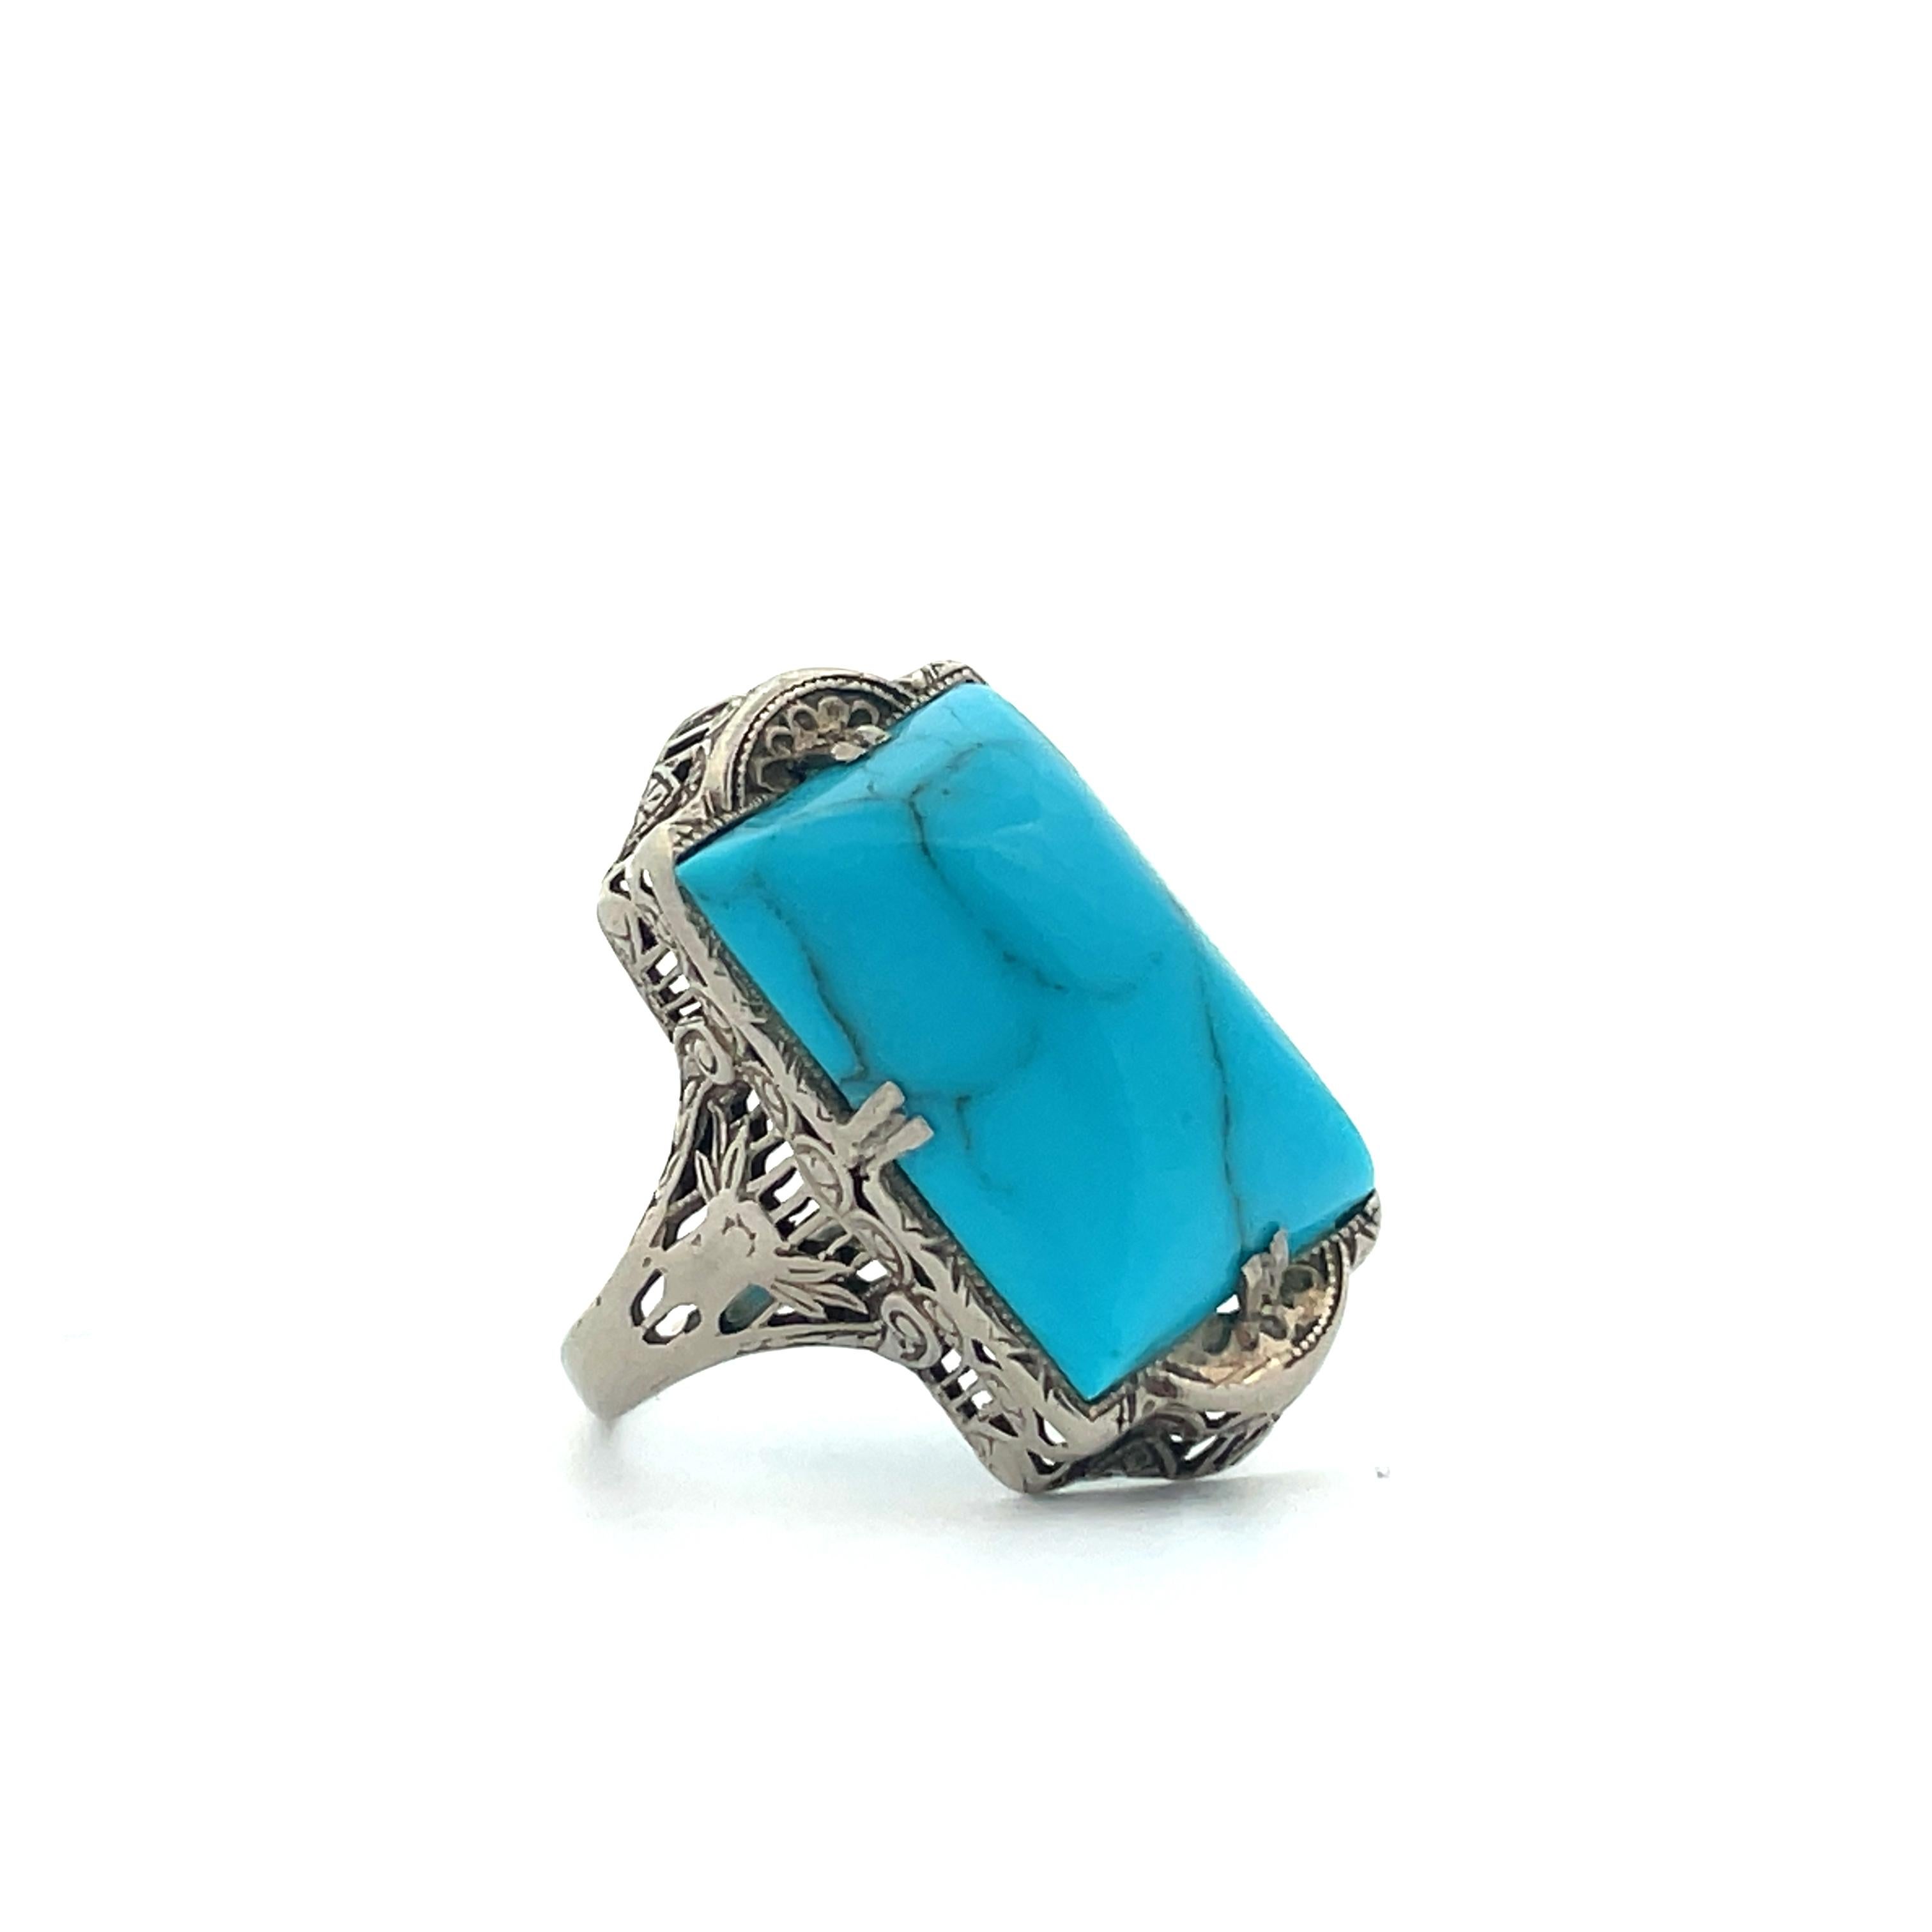  1920s 14k White Gold and Turquoise Cabochon Filigree Ring  1